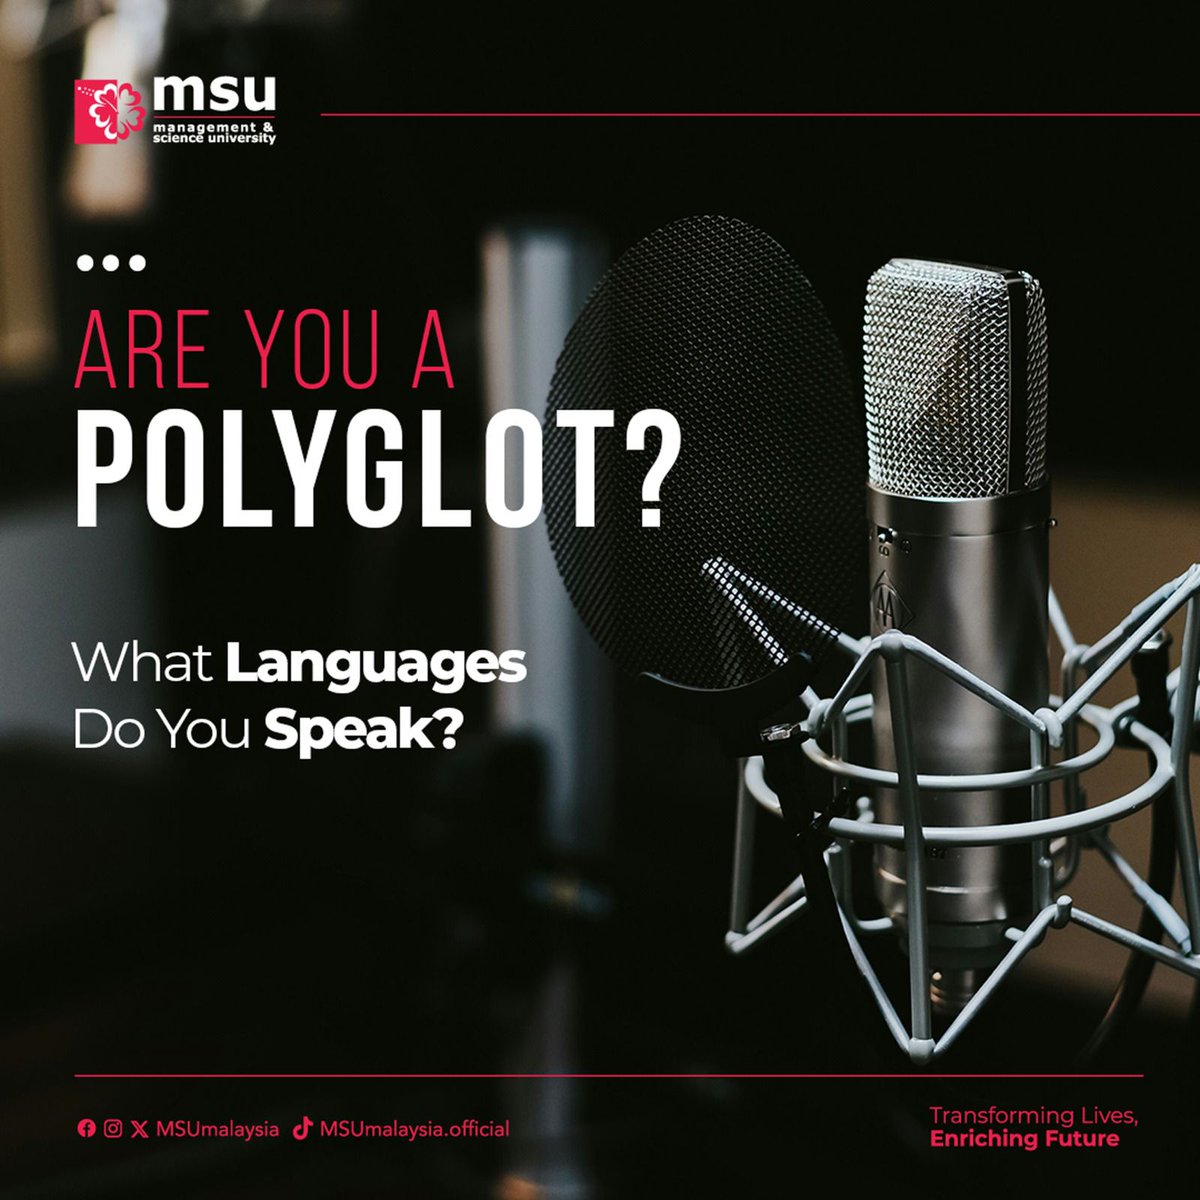 #MSUmalaysia offers a wide range of foreign languages to learn, and plus, with #MSUrians from various ethnicities and backgrounds, it's very convenient to pick up a new language on campus. Tell us in the comment: What are the languages you can speak other than your mother tongue?